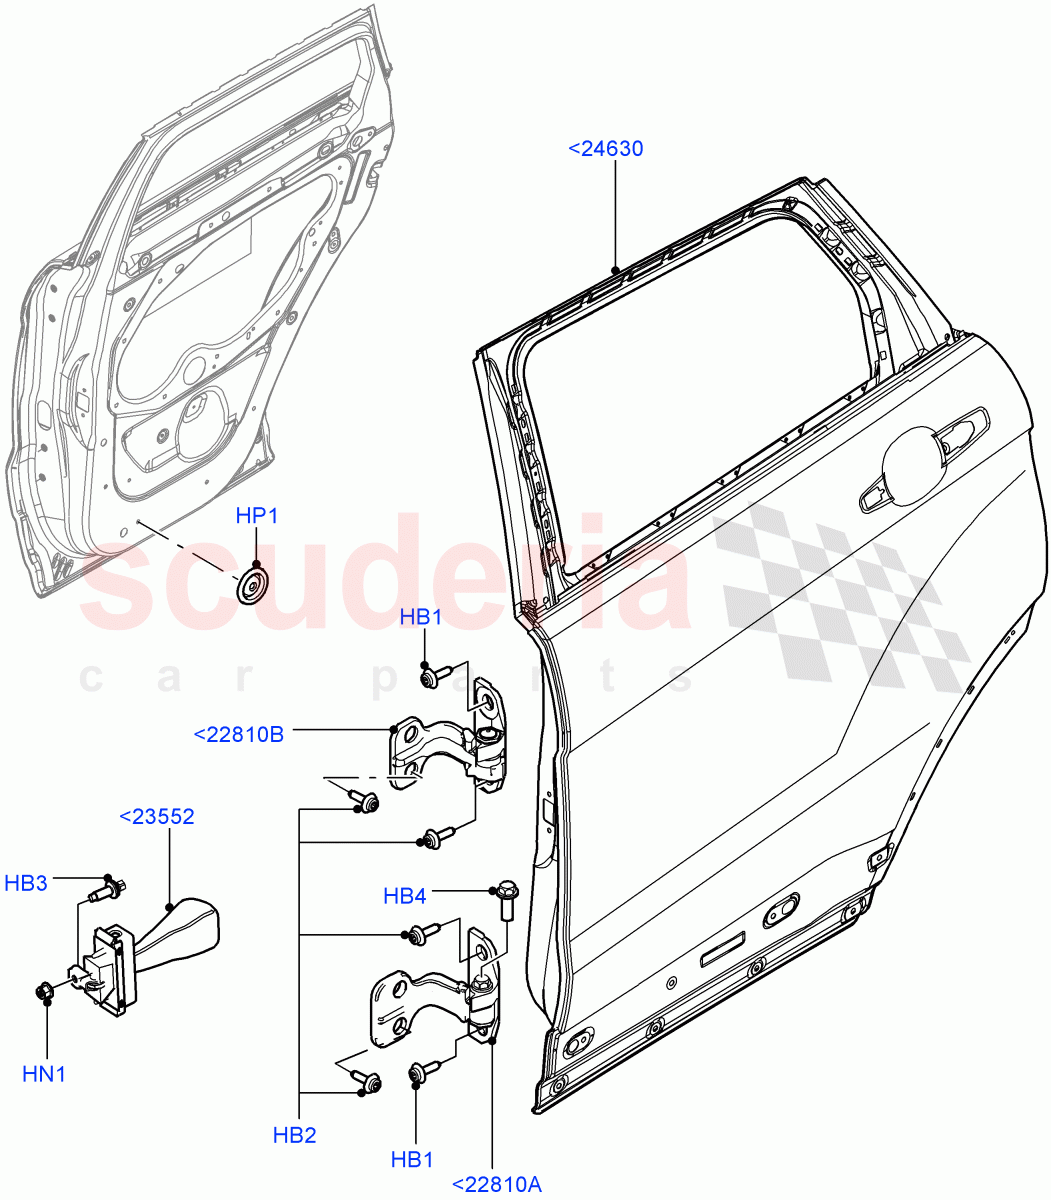 Rear Doors, Hinges & Weatherstrips(Door And Fixings)(Changsu (China))((V)FROMEG000001) of Land Rover Land Rover Range Rover Evoque (2012-2018) [2.2 Single Turbo Diesel]